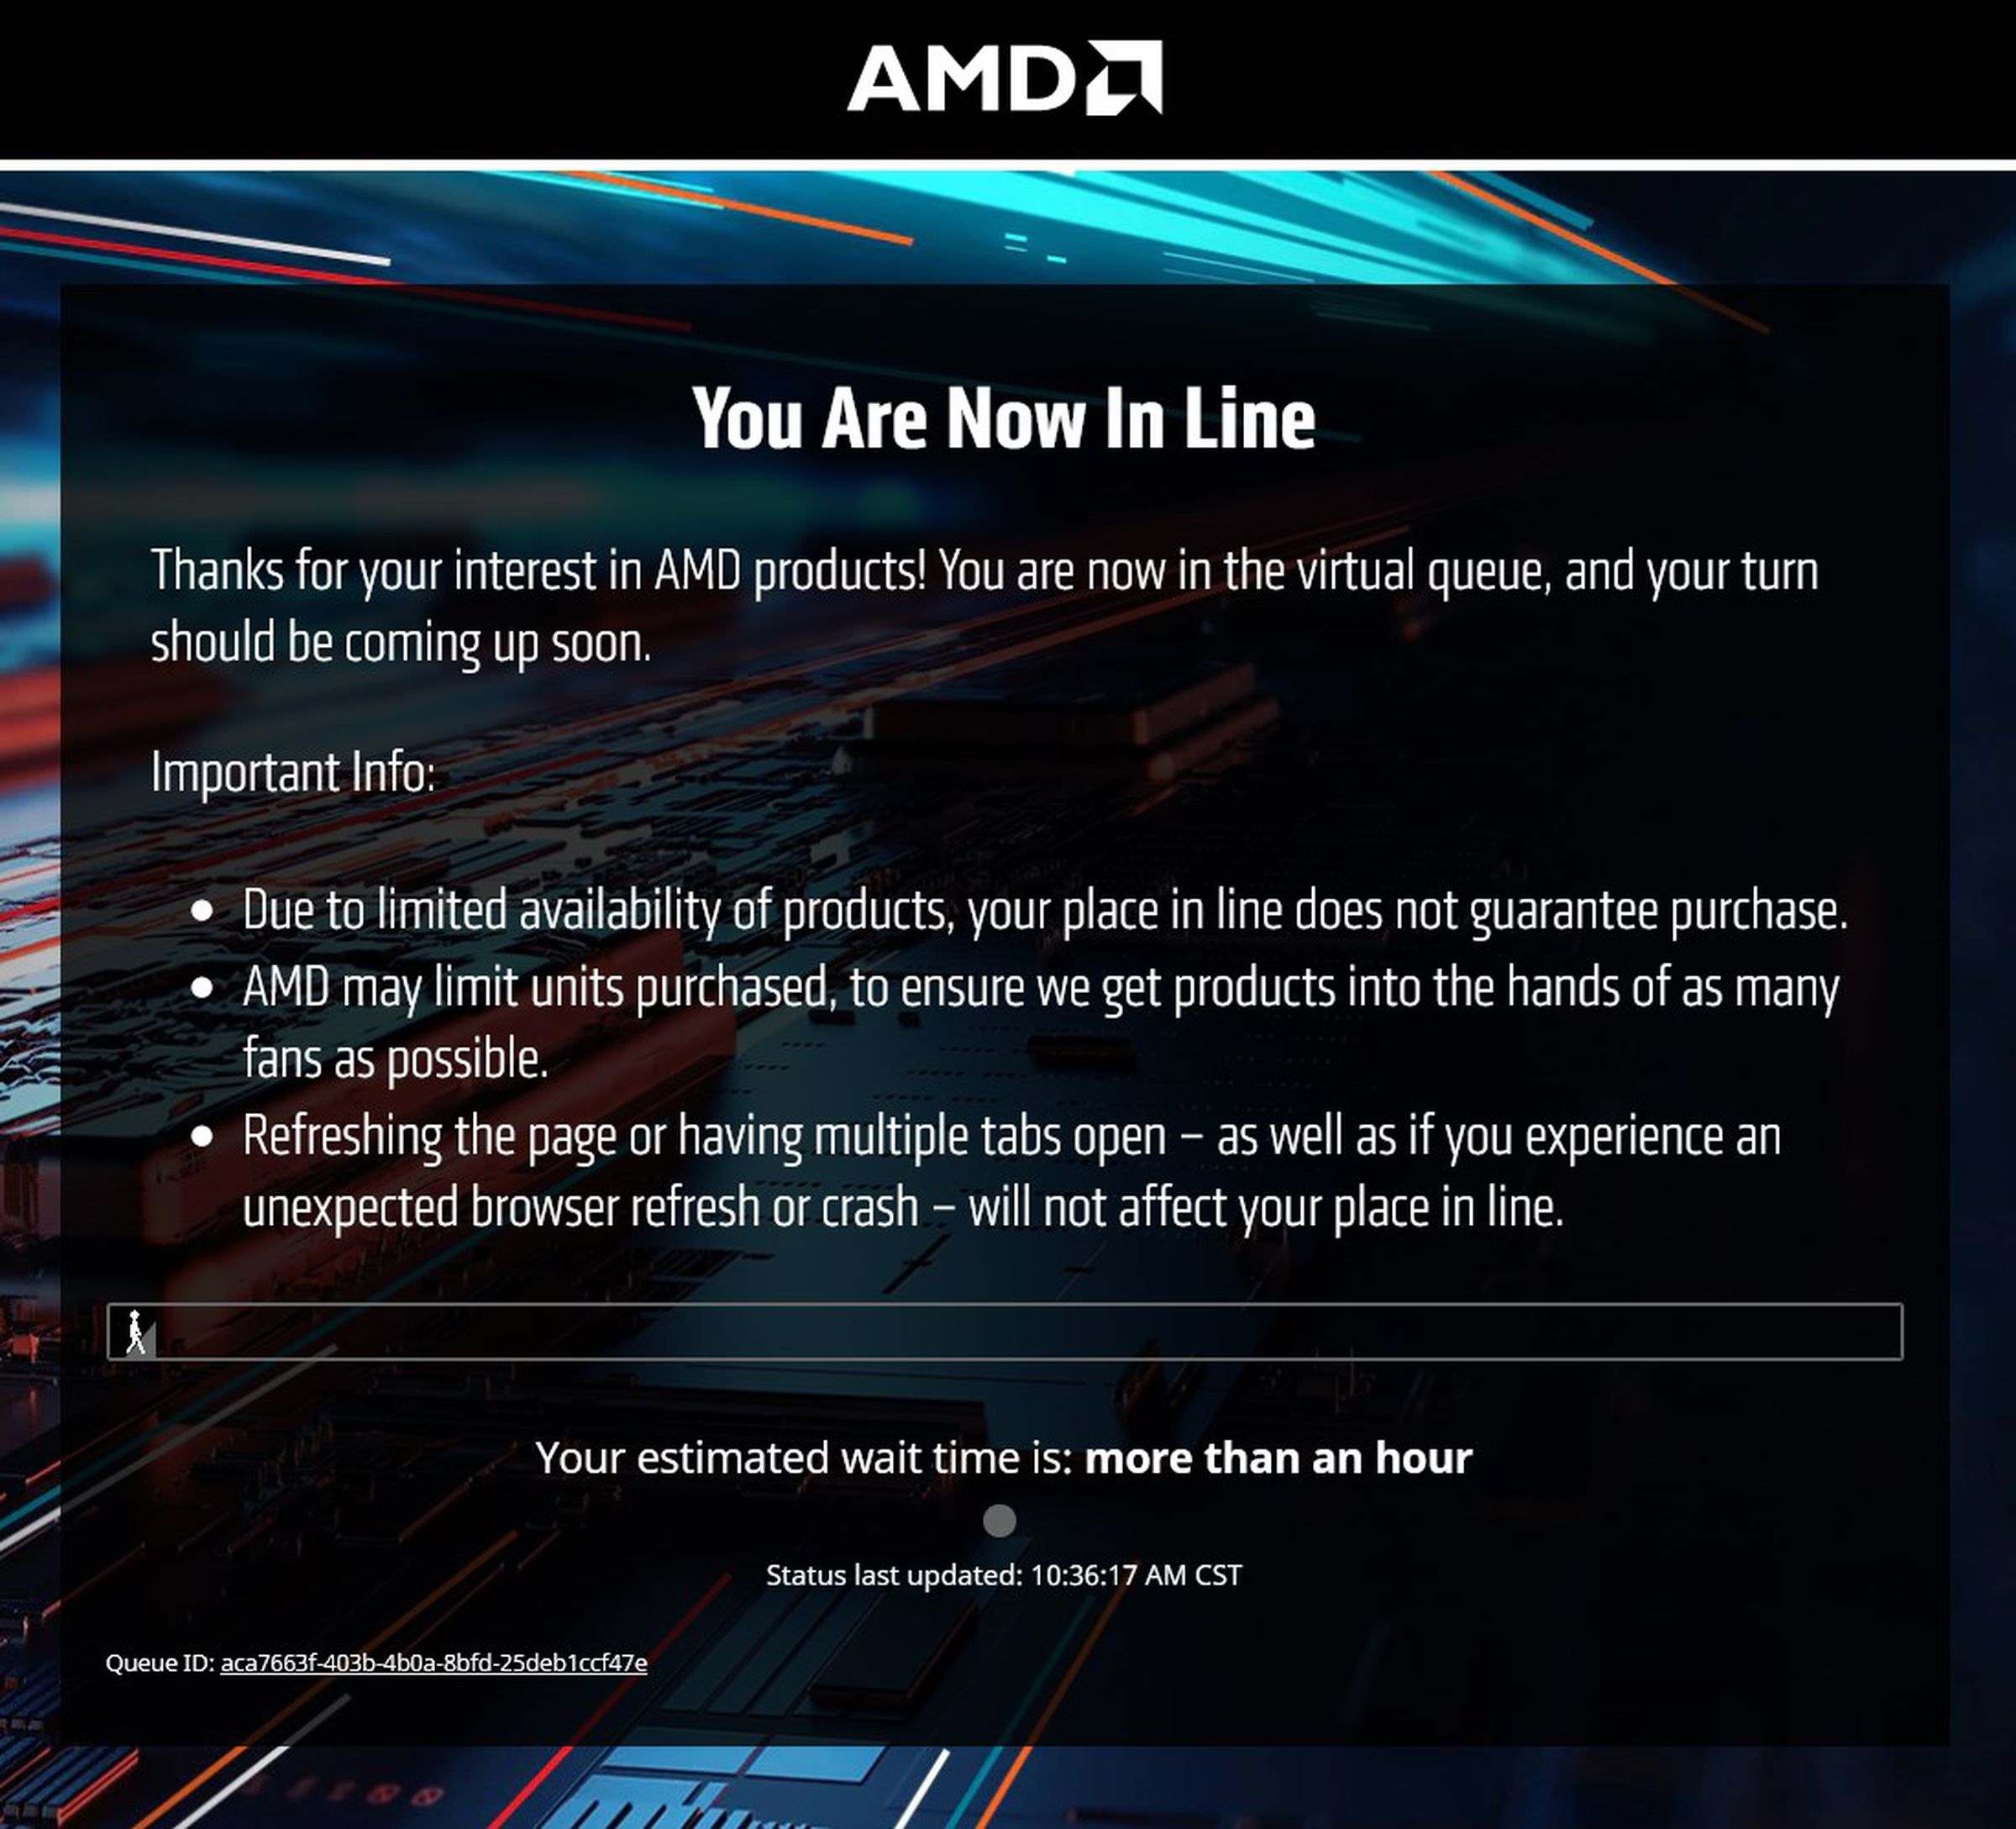 Even though I signed up for the AMD queue as soon as it opened, my wait time was over an hour. Tricks like Falcodrin’s let you “re-roll” your wait time. 